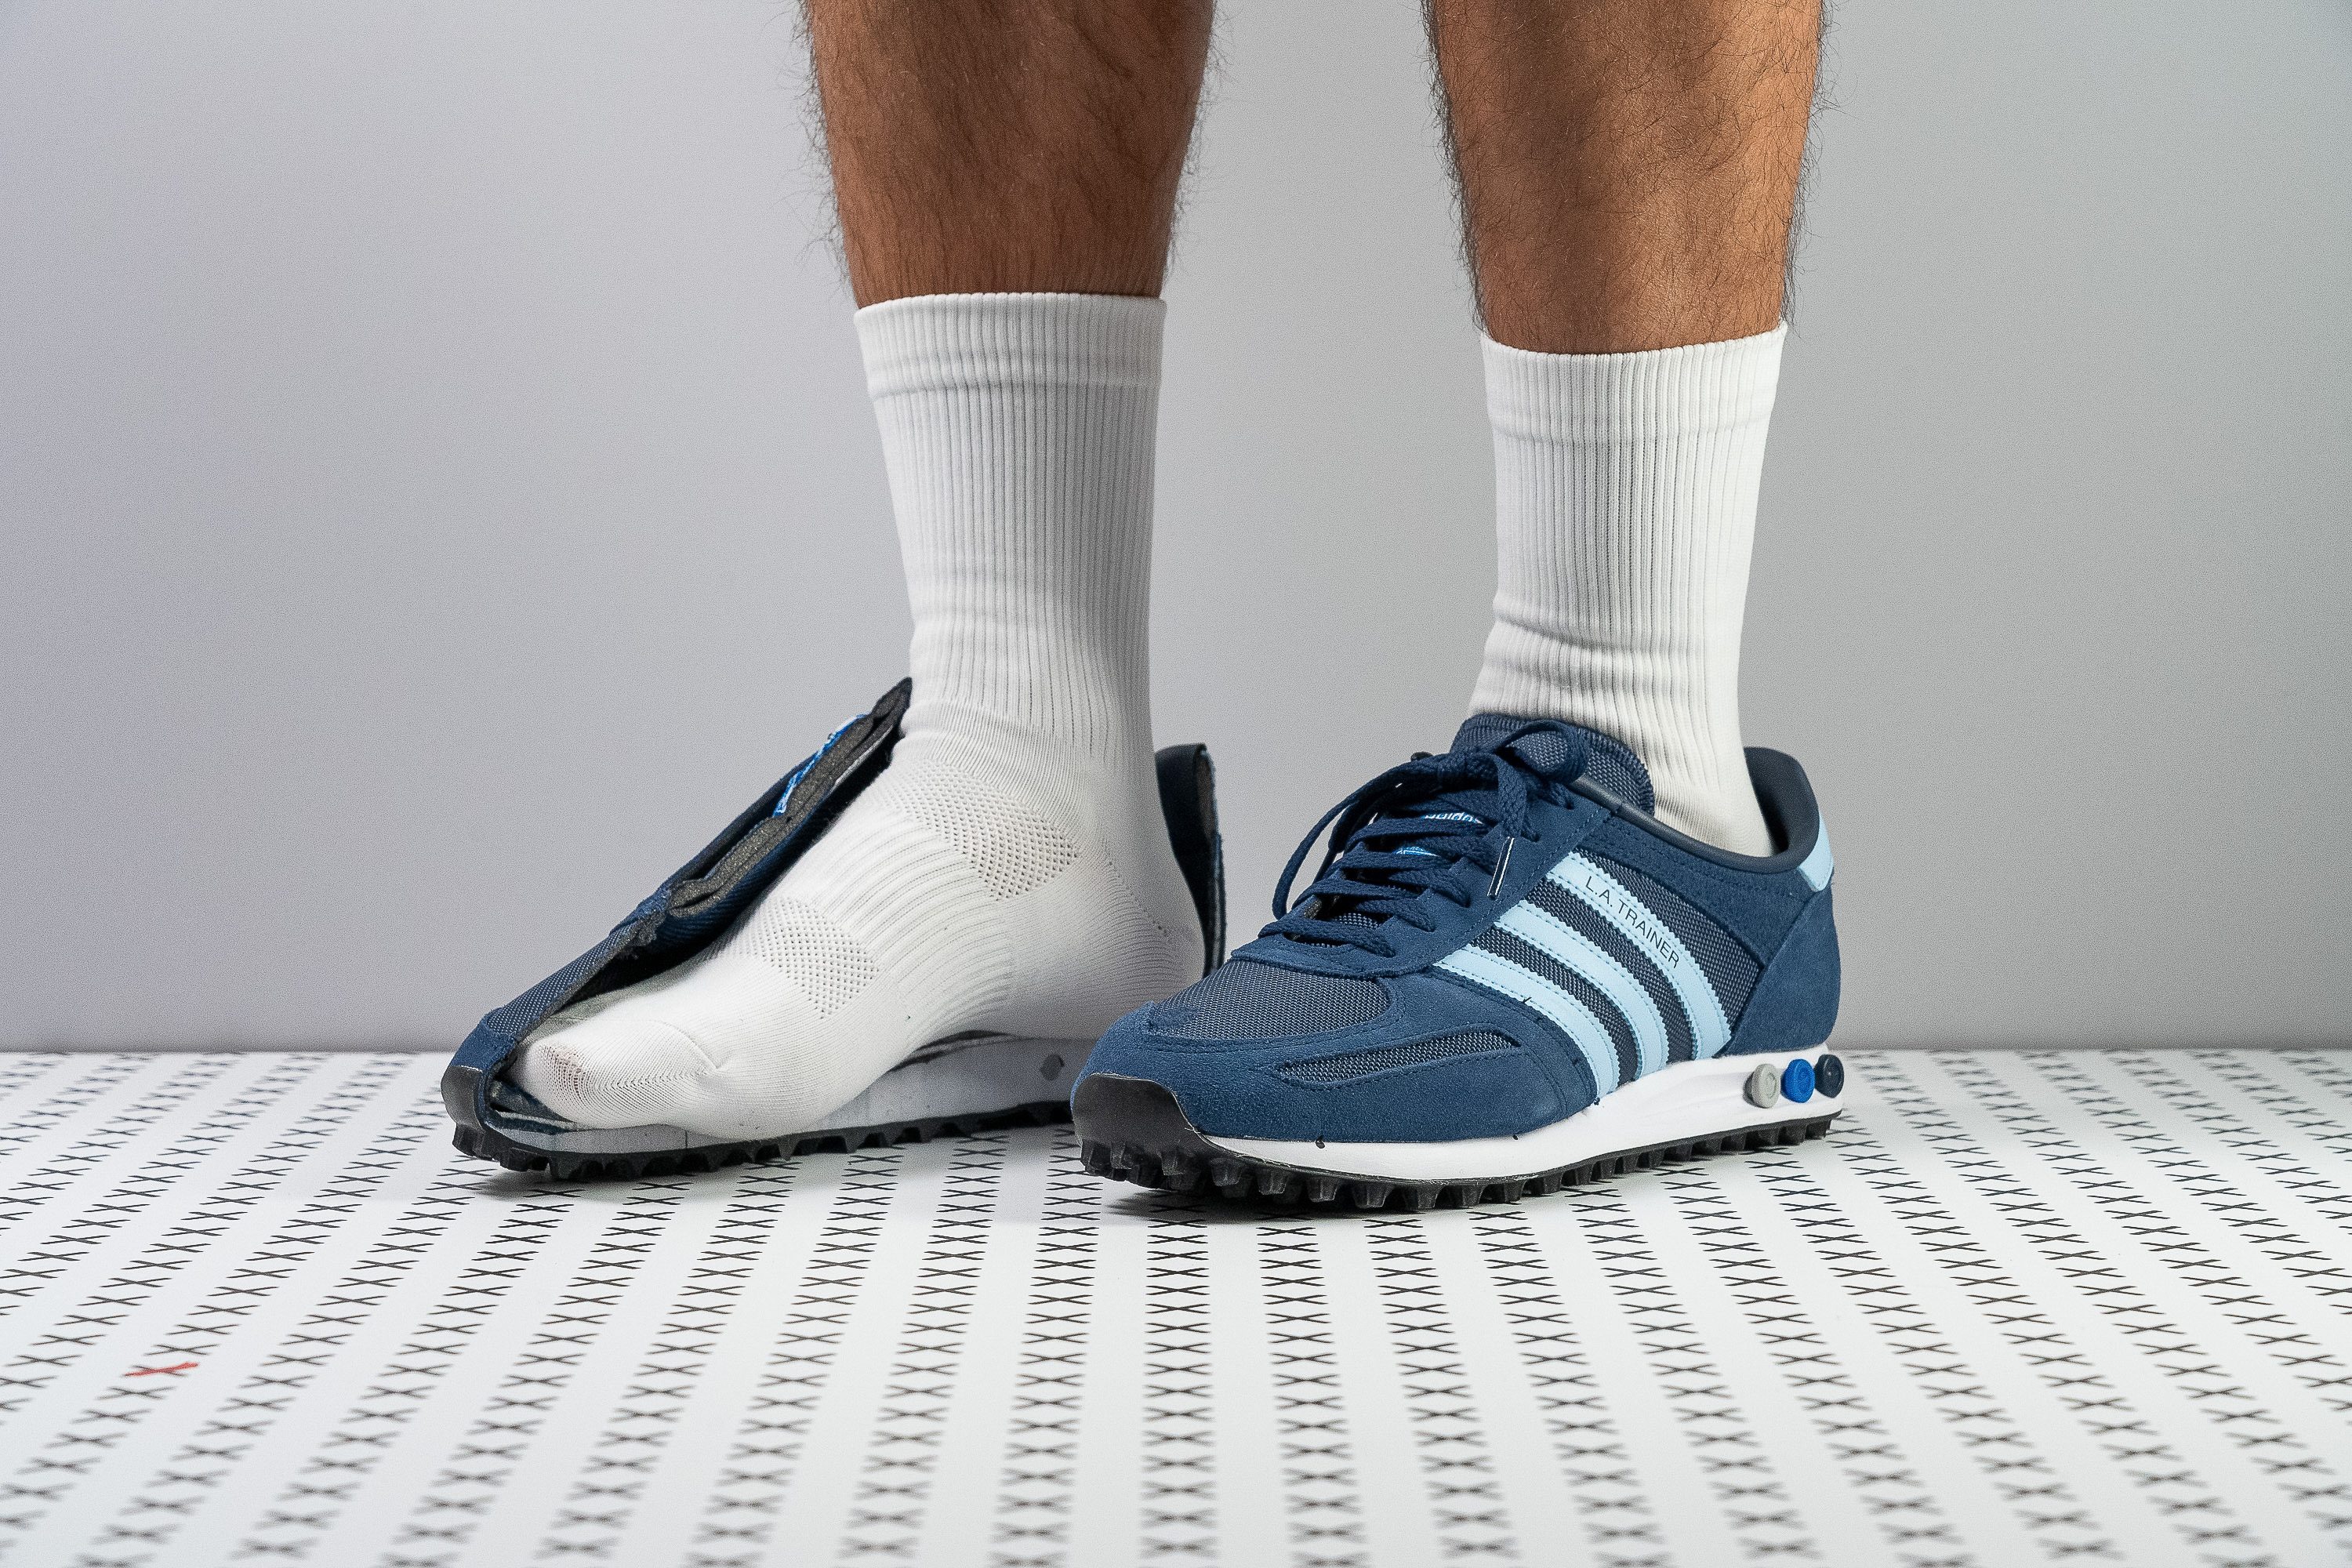 Adidas LA Trainer lab test and review